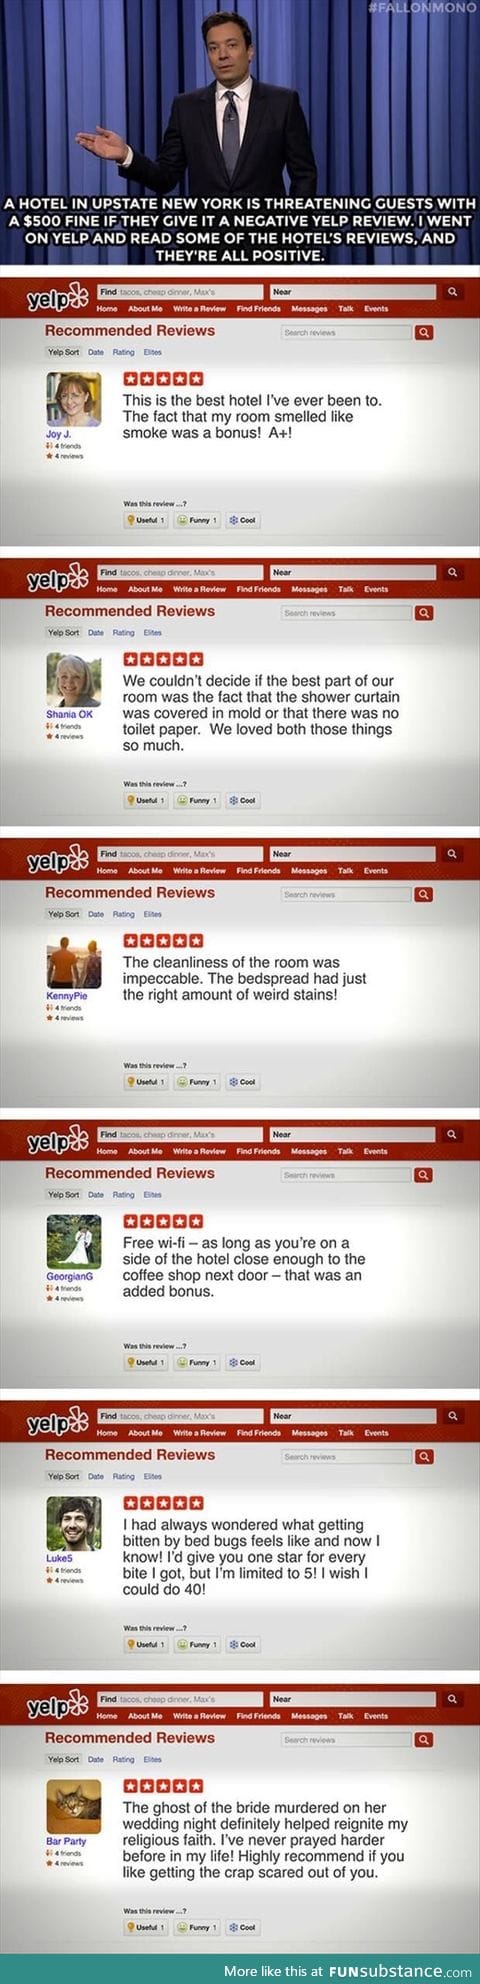 Positive reviews are totally positive...